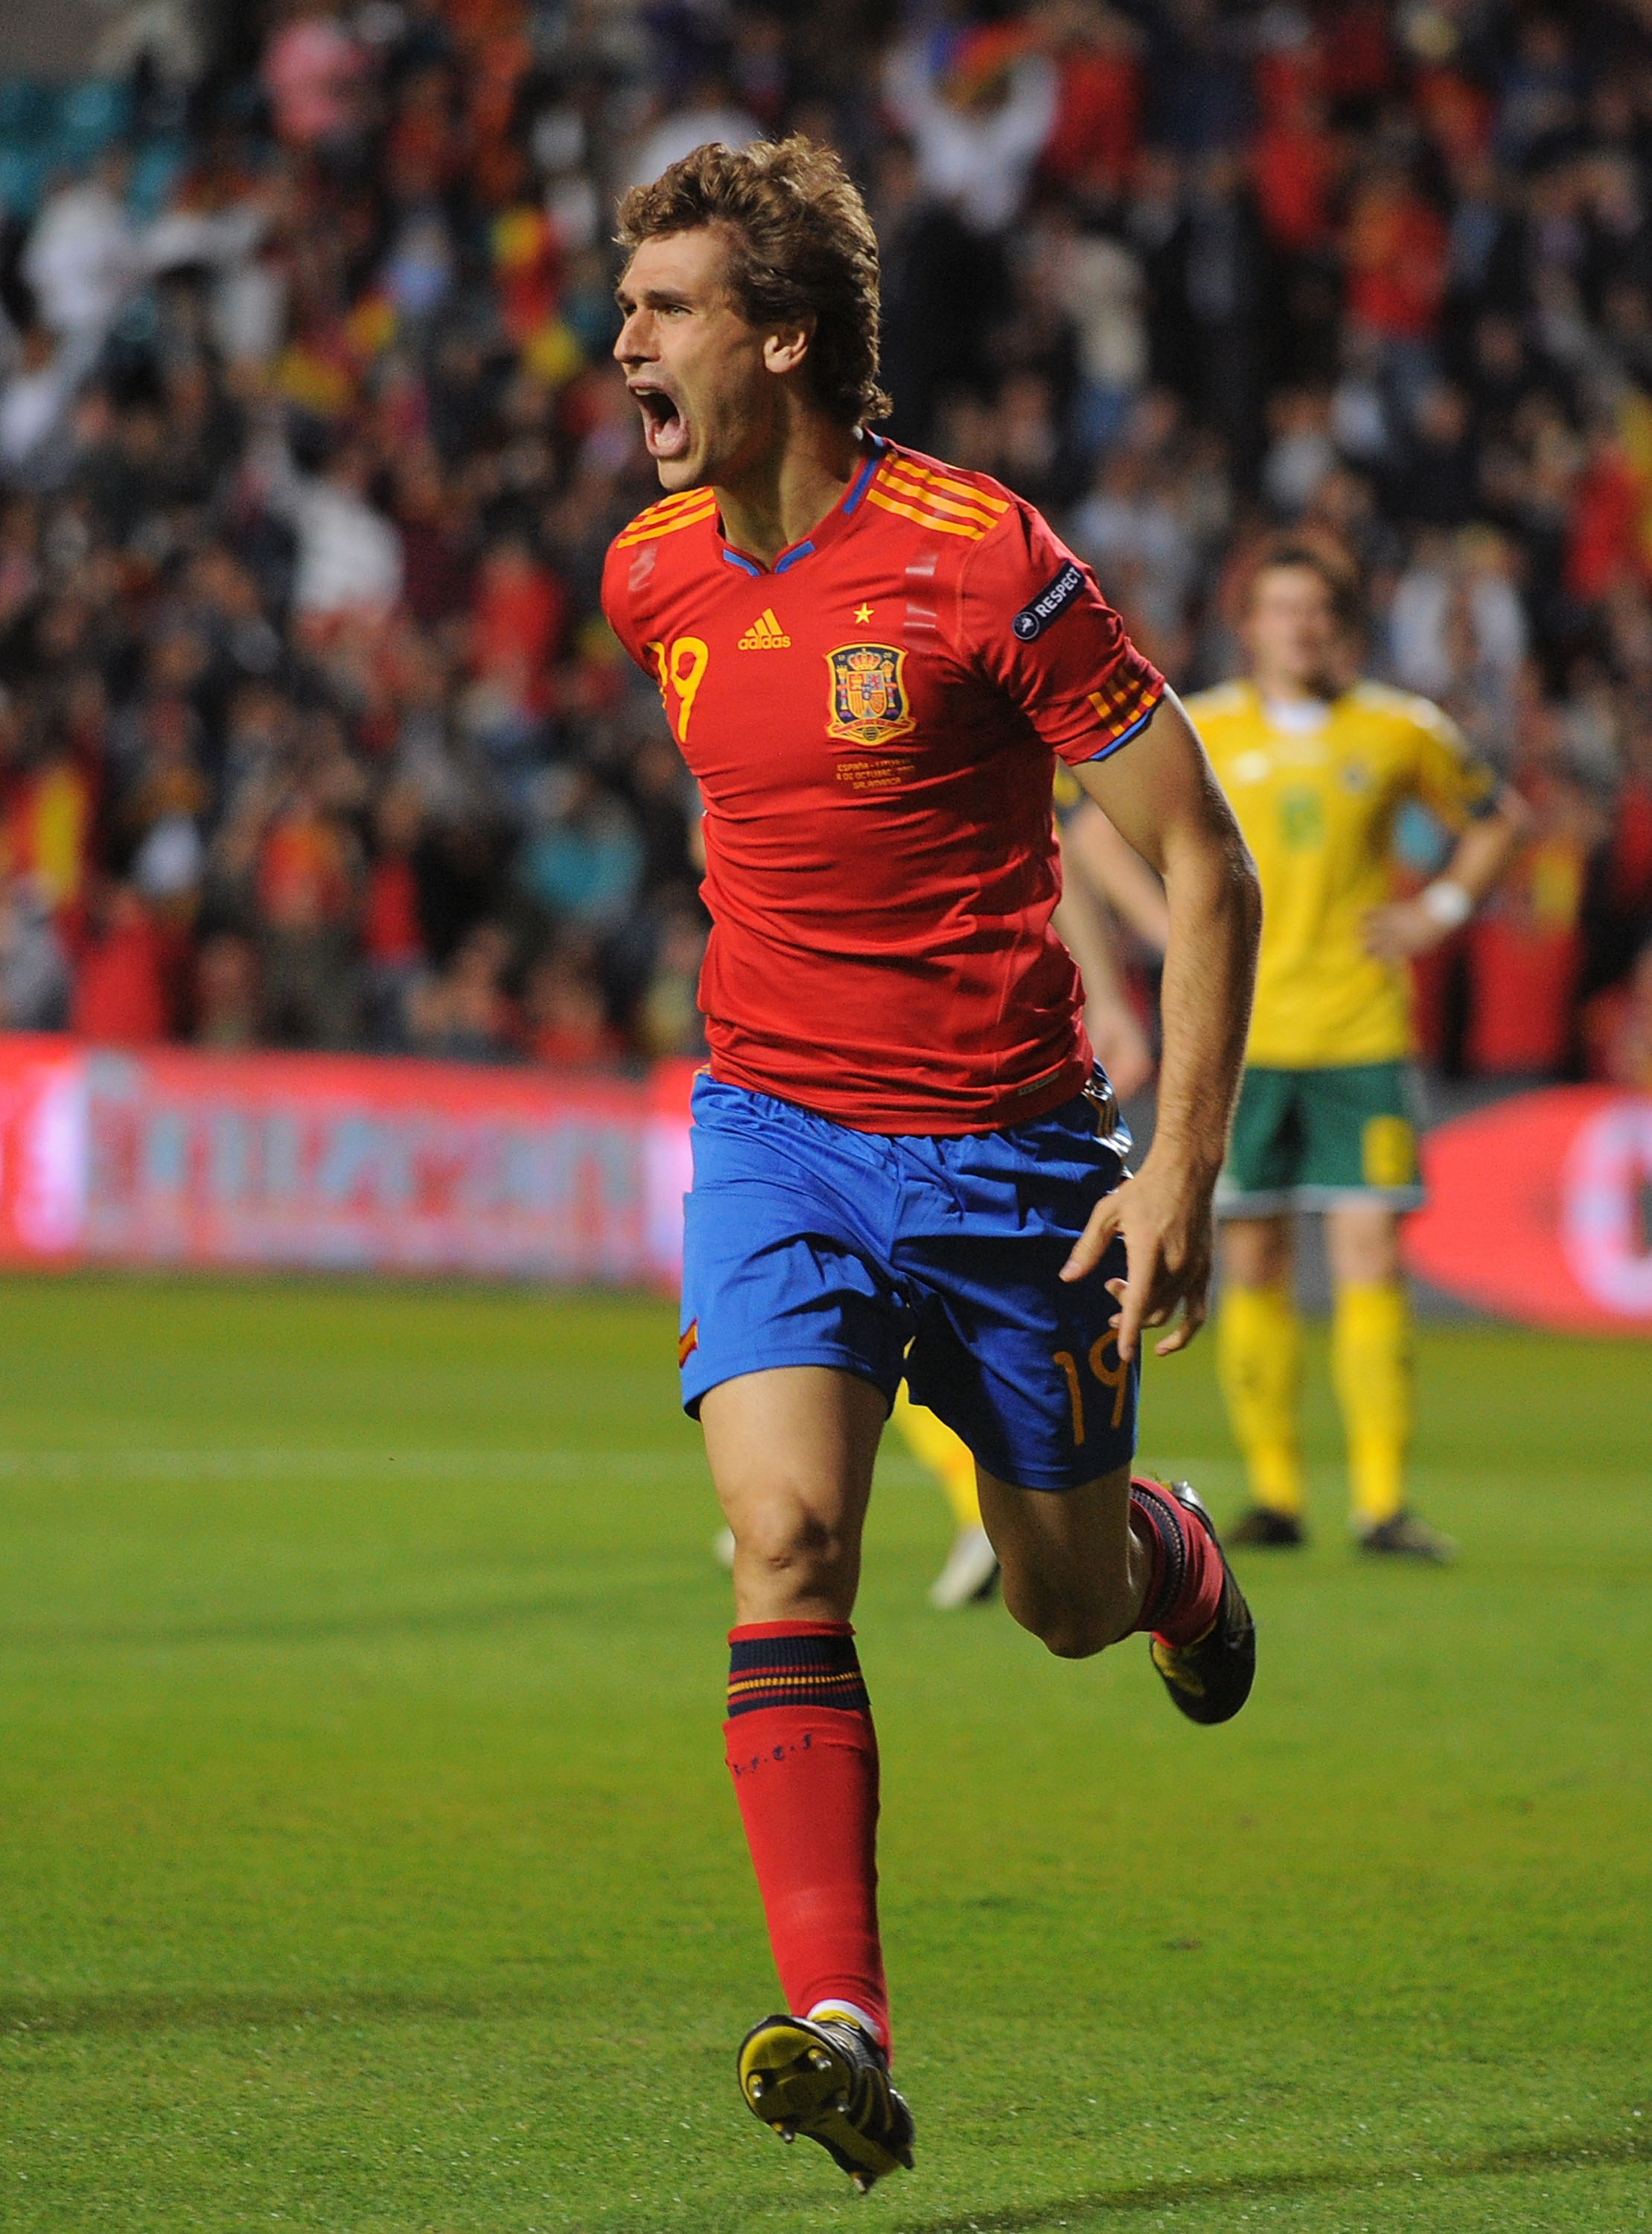 SALAMANCA, SPAIN - OCTOBER 08:  Fernando Llorente of Spain celebrates after scoring his team's first goal during the EURO 2012 Qualifying Group I match between Spain and Lithuania at the Helmantico stadium on October 8, 2010 in Salamanca, Spain.  (Photo b